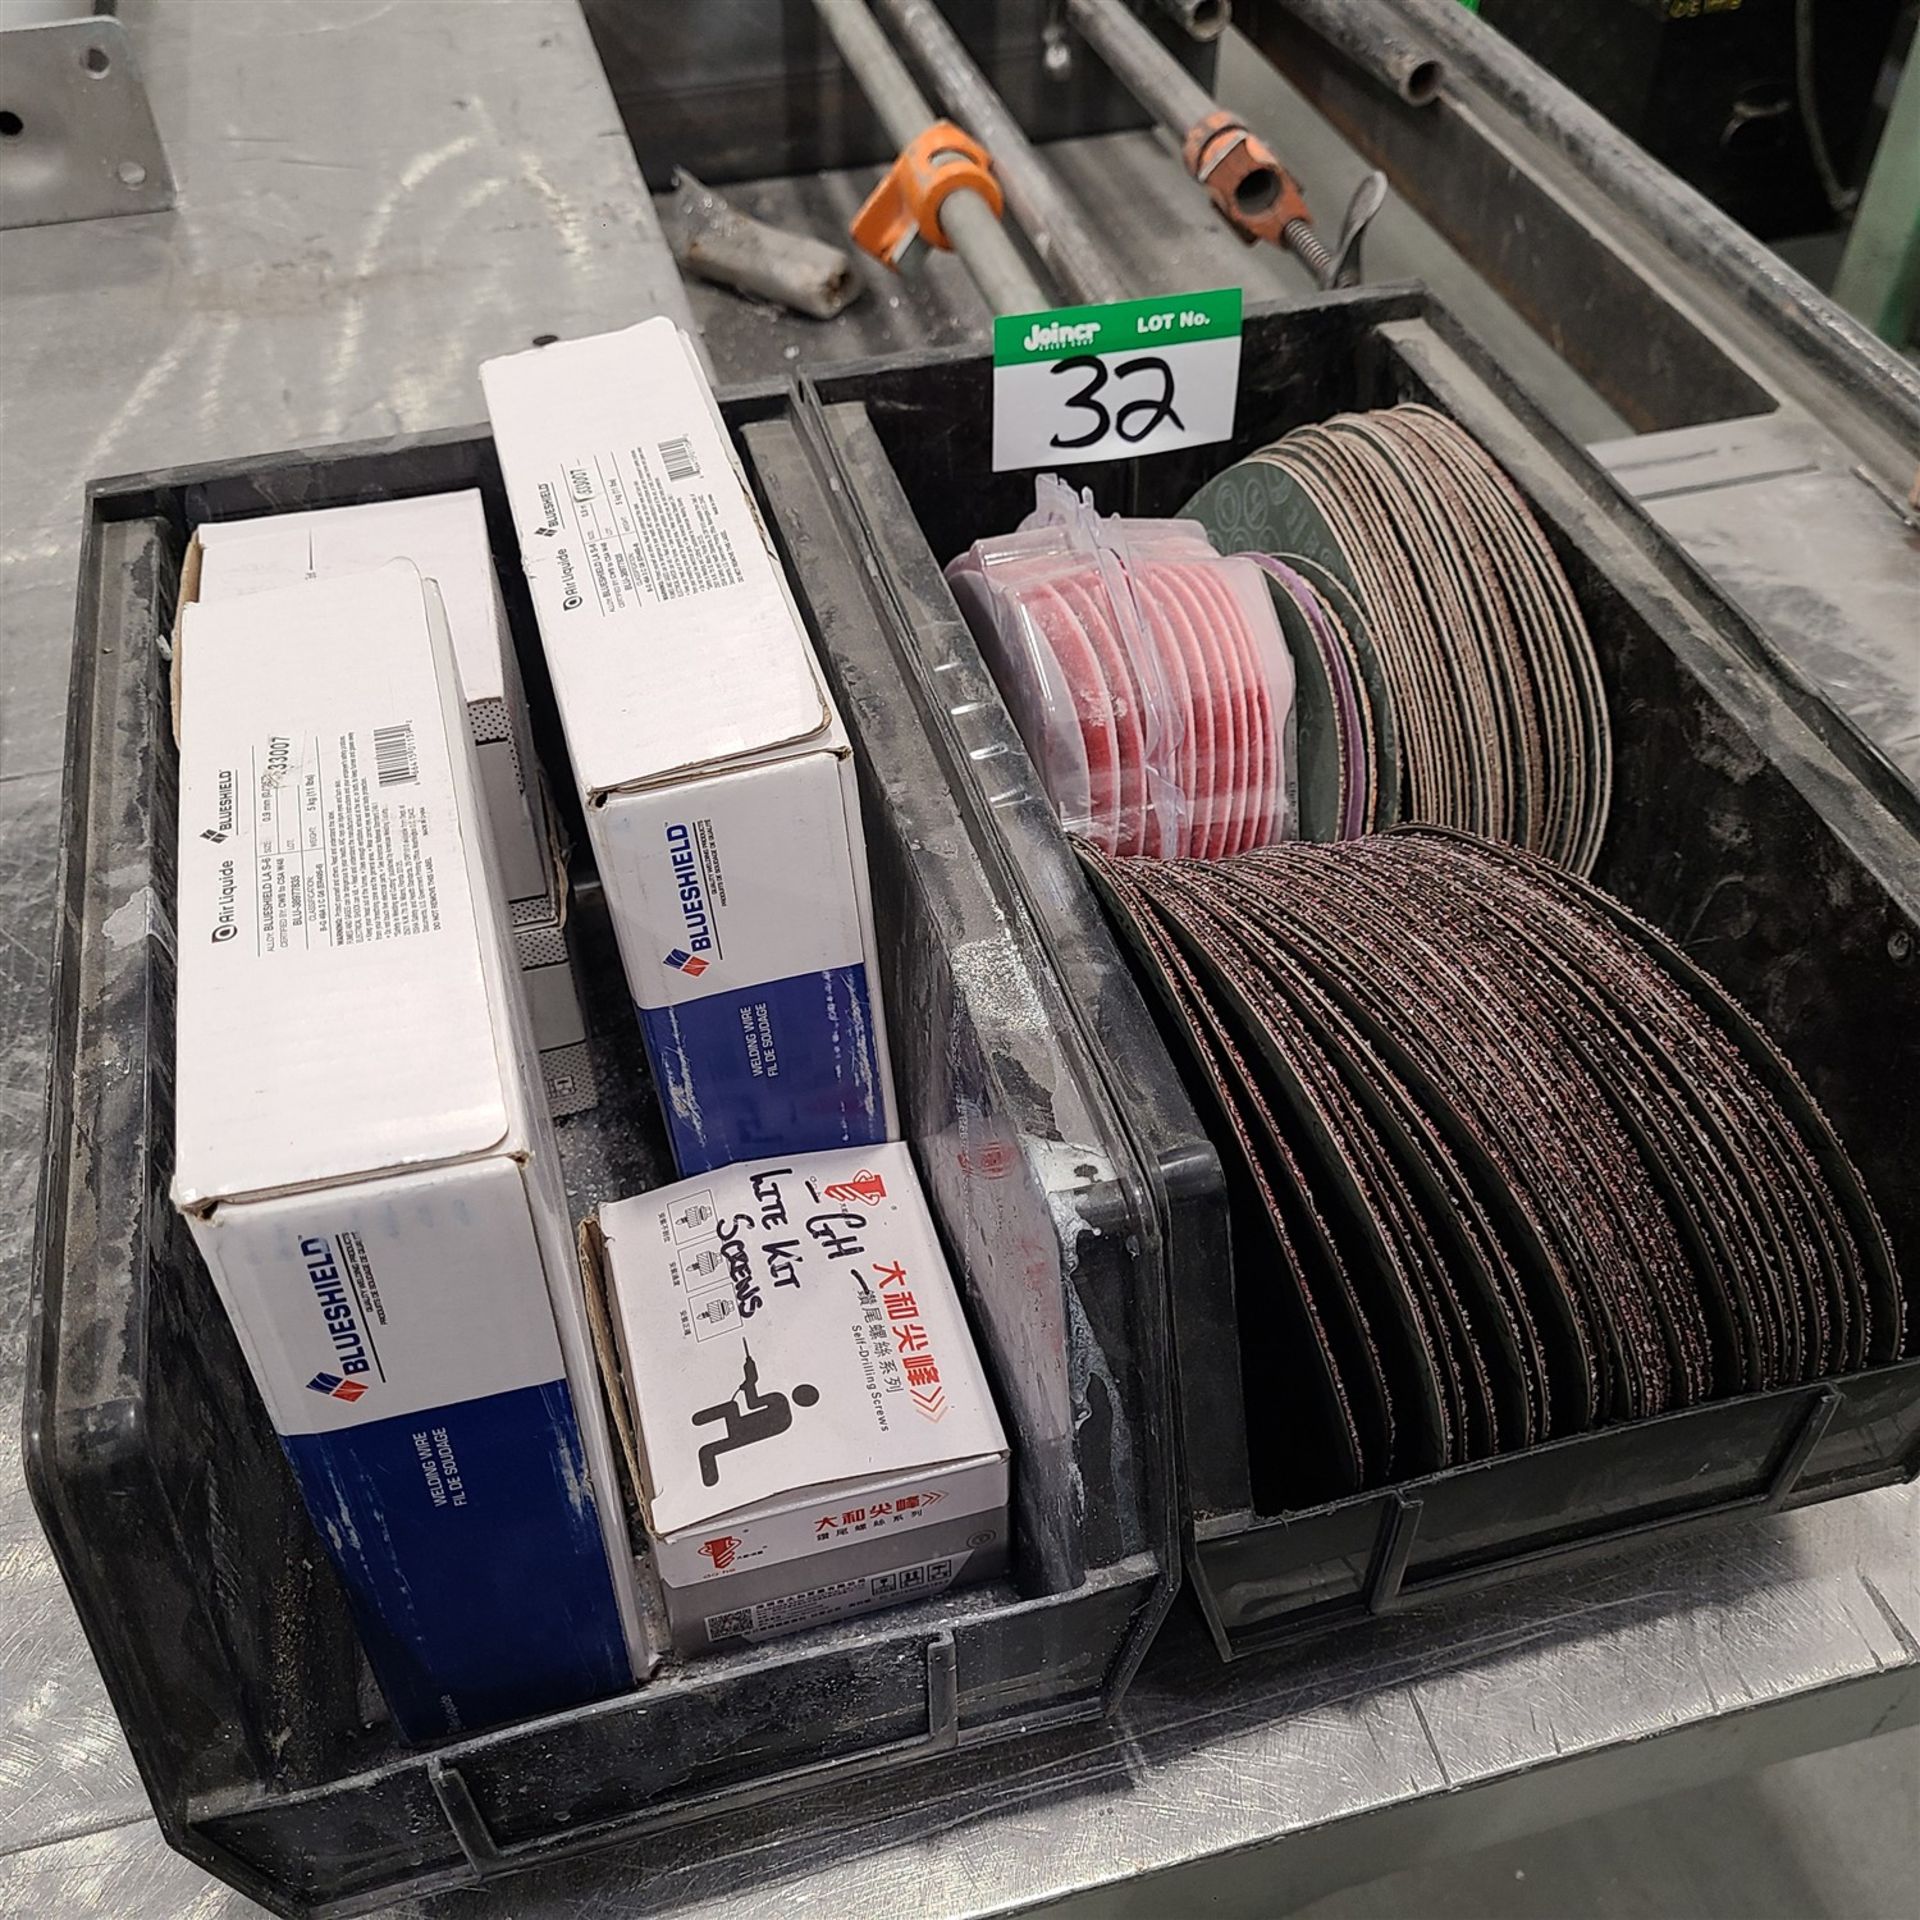 2 PARTS TRAYS OF WELDING WIRE, ABRASIVE DISCS